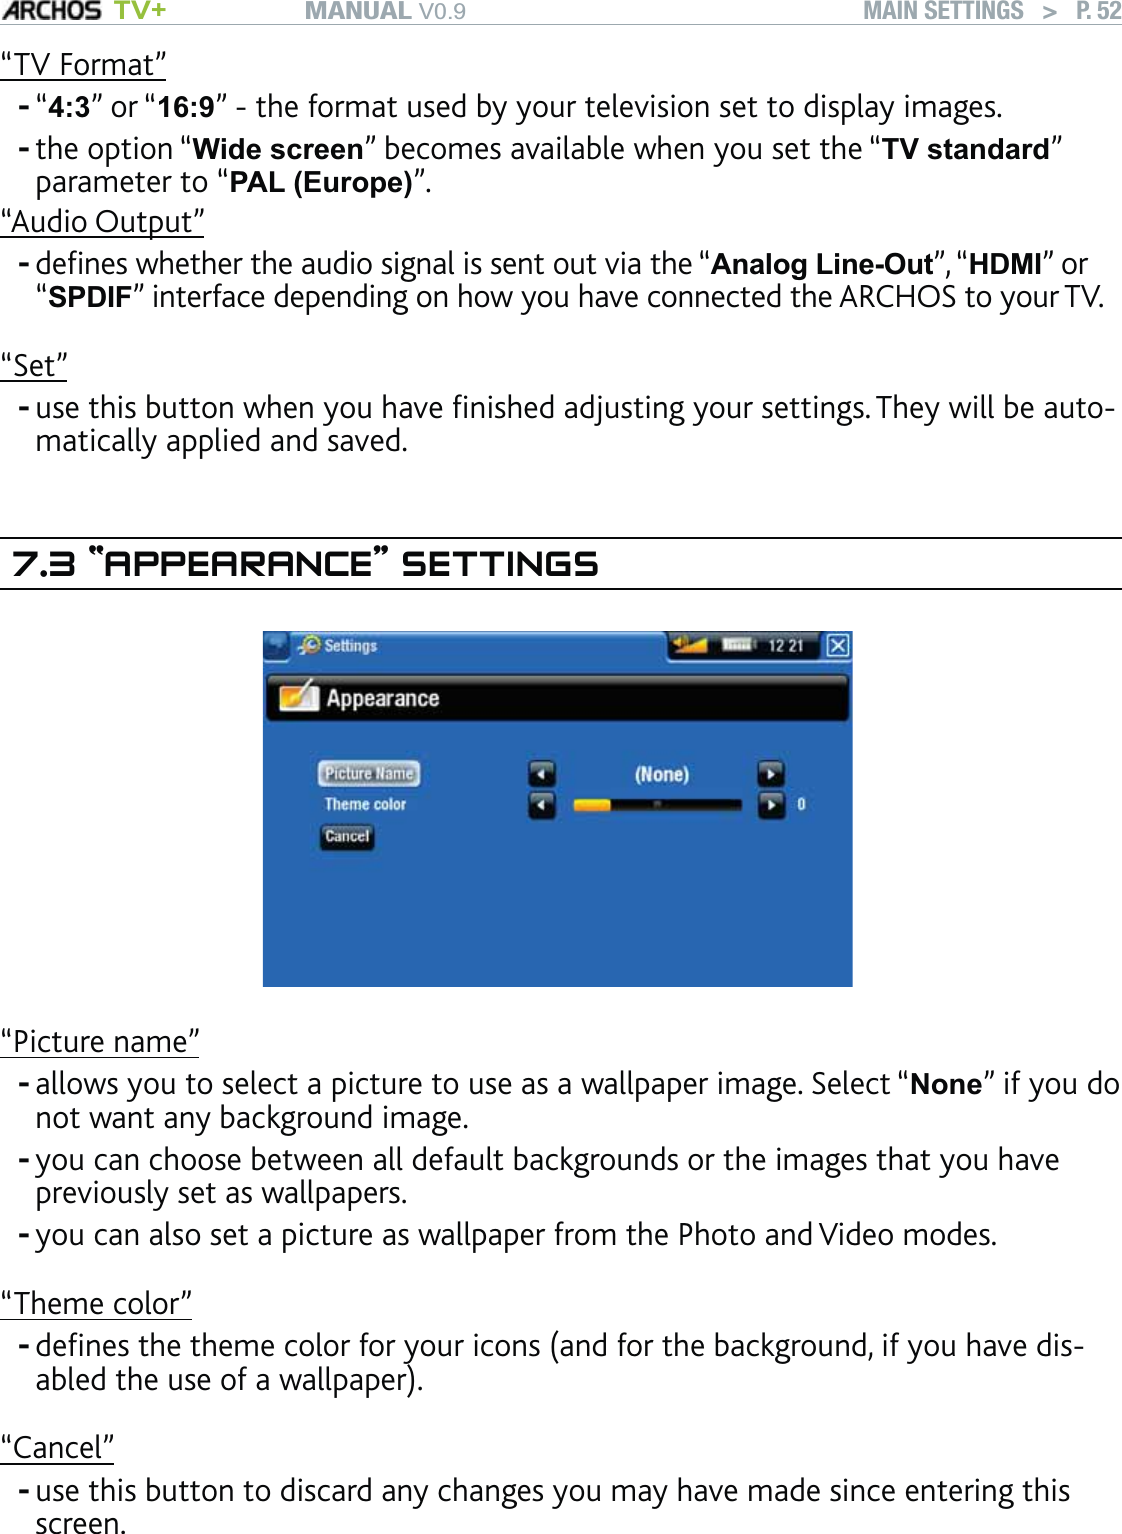 MANUAL V0.9 TV+ MAIN SETTINGS   &gt;   P. 52“TV Format”“4:3” or “16:9” - the format used by your television set to display images. the option “Wide screen” becomes available when you set the “TV standard” parameter to “PAL (Europe)”.“Audio Output”deﬁnes whether the audio signal is sent out via the “Analog Line-Out”, “HDMI” or “SPDIF” interface depending on how you have connected the ARCHOS to your TV. “Set”use this button when you have ﬁnished adjusting your settings. They will be auto-matically applied and saved.7.3 “APPEARANCE” SETTINGS“Picture name”allows you to select a picture to use as a wallpaper image. Select “None” if you do not want any background image.you can choose between all default backgrounds or the images that you have previously set as wallpapers.you can also set a picture as wallpaper from the Photo and Video modes.“Theme color”deﬁnes the theme color for your icons (and for the background, if you have dis-abled the use of a wallpaper).“Cancel”use this button to discard any changes you may have made since entering this screen.---------